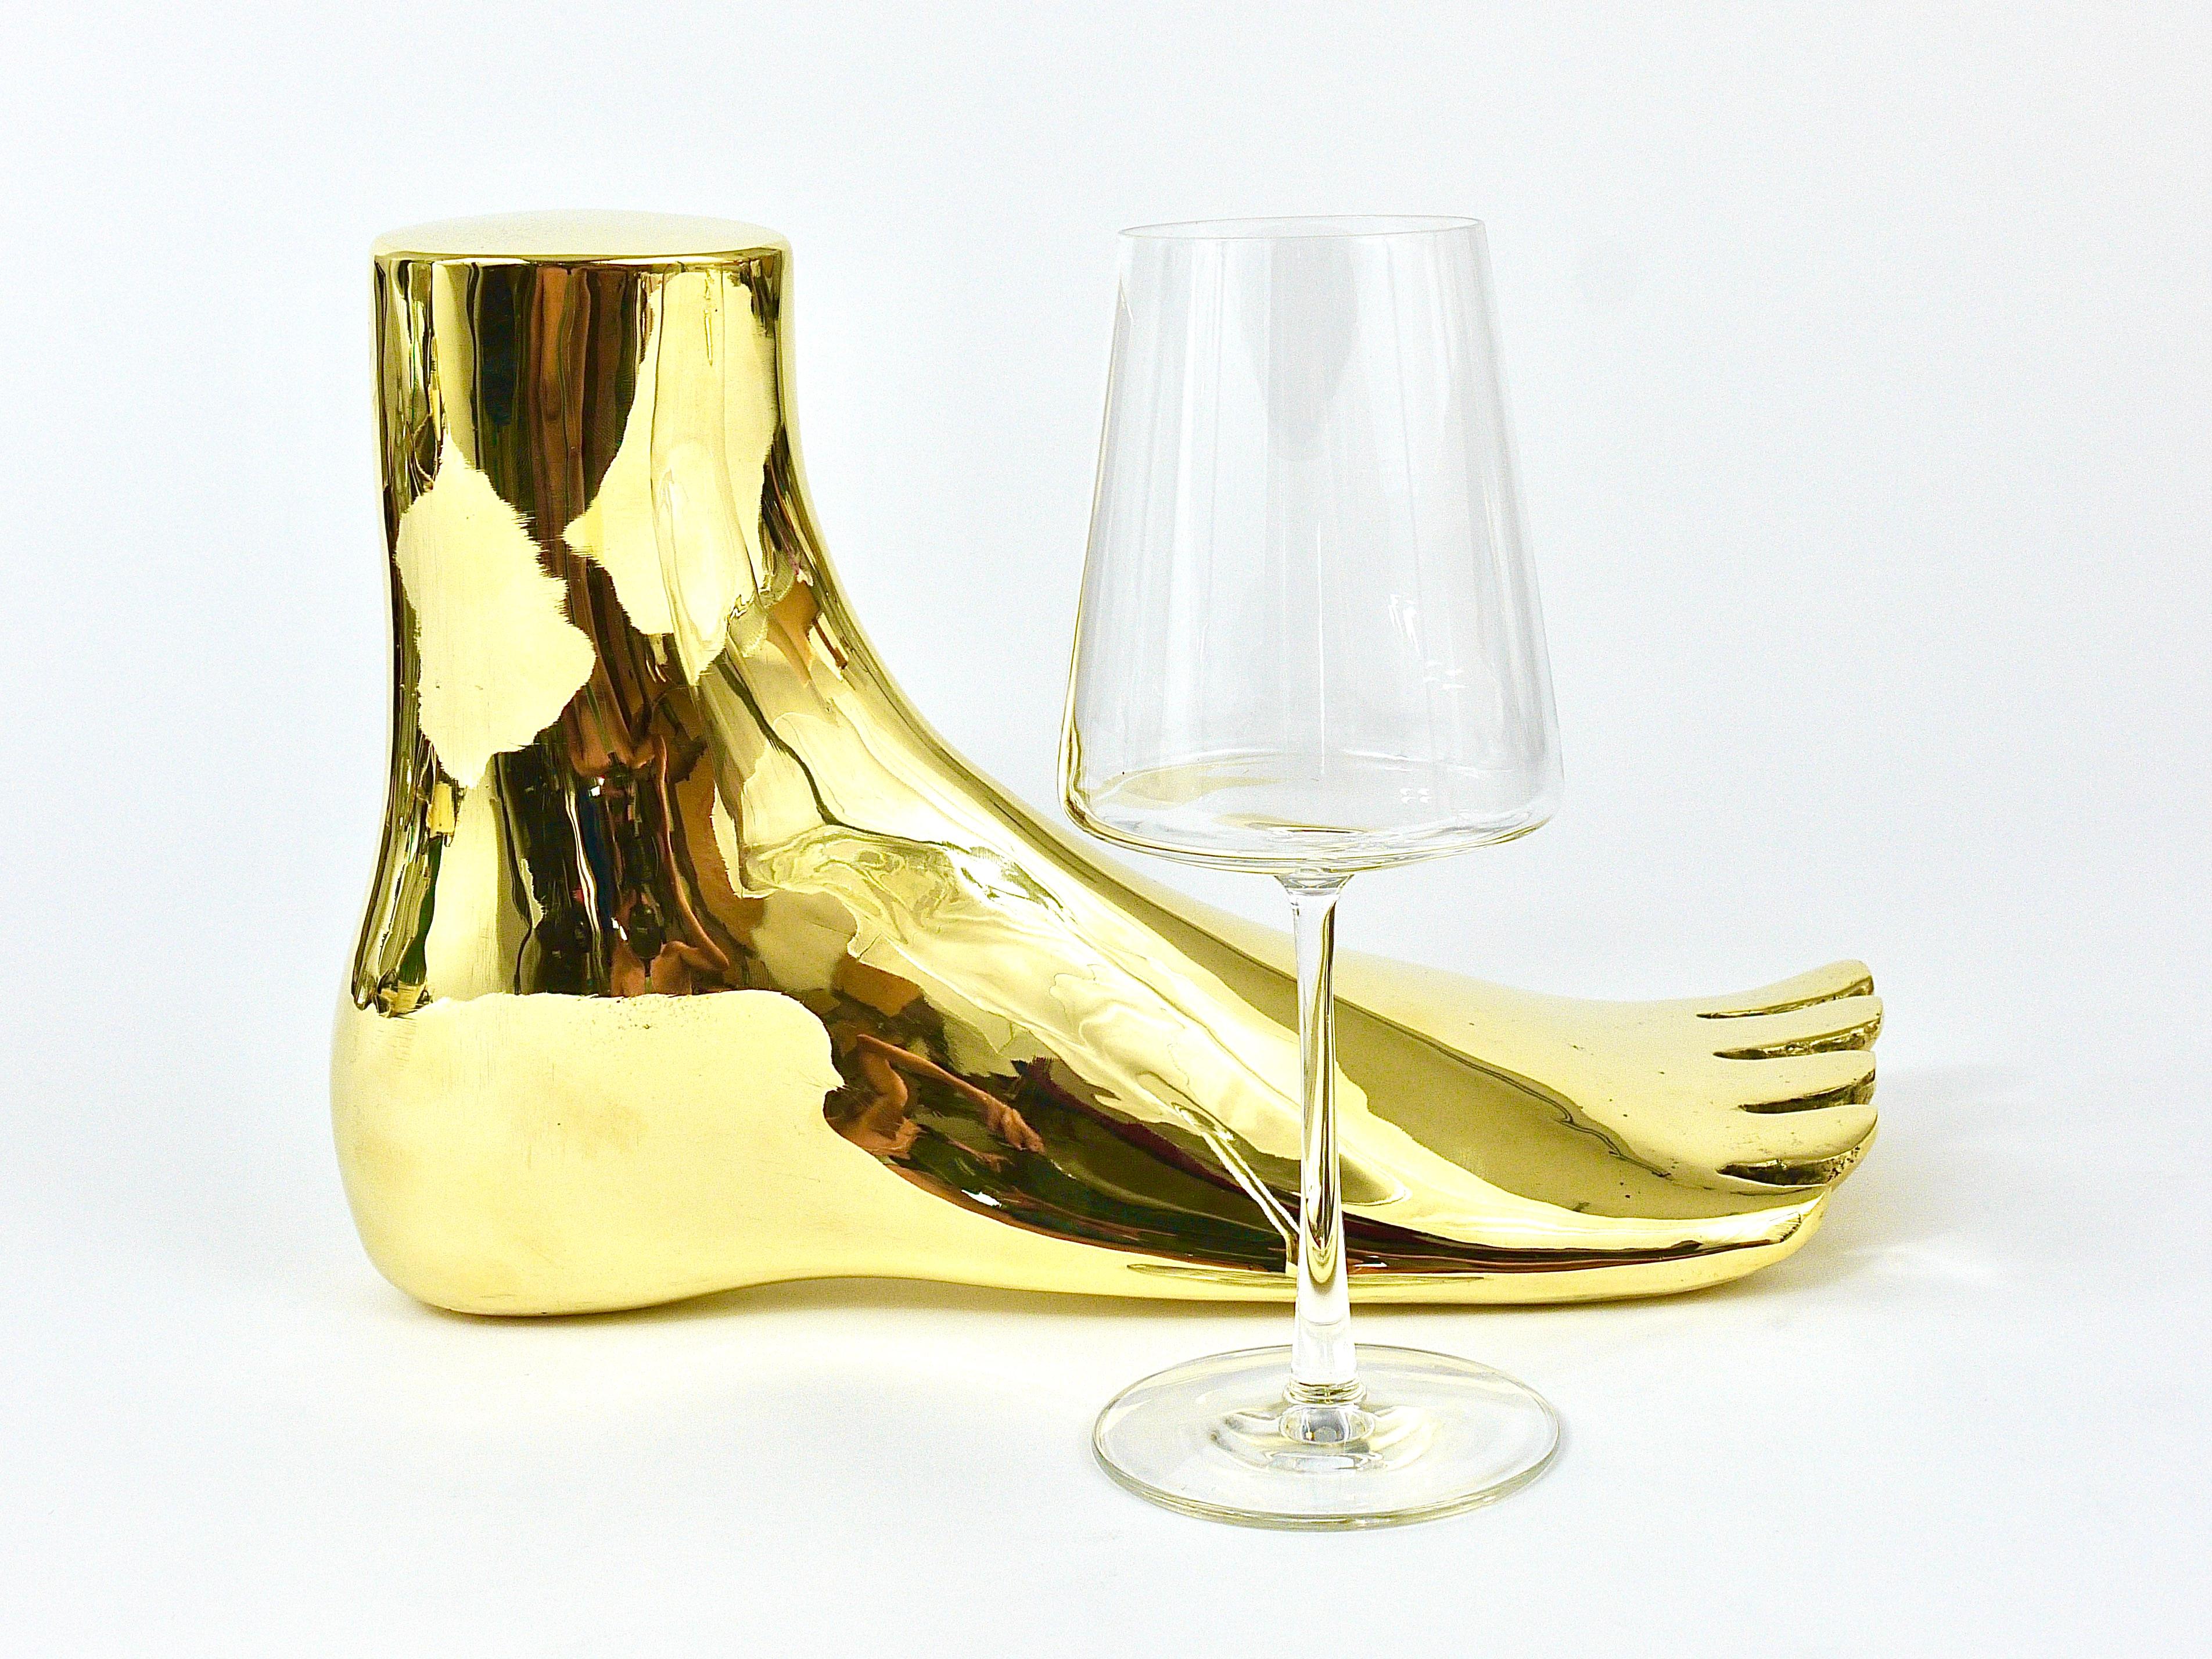 We are offering this impressive 13“ long and 8“high brass foot sculpture, designed and manufactured by Werkstätte Carl Auböck, Vienna, Austria.

This the second ever-made piece of this giant foot. 
The first is displayed in the Birkenstock